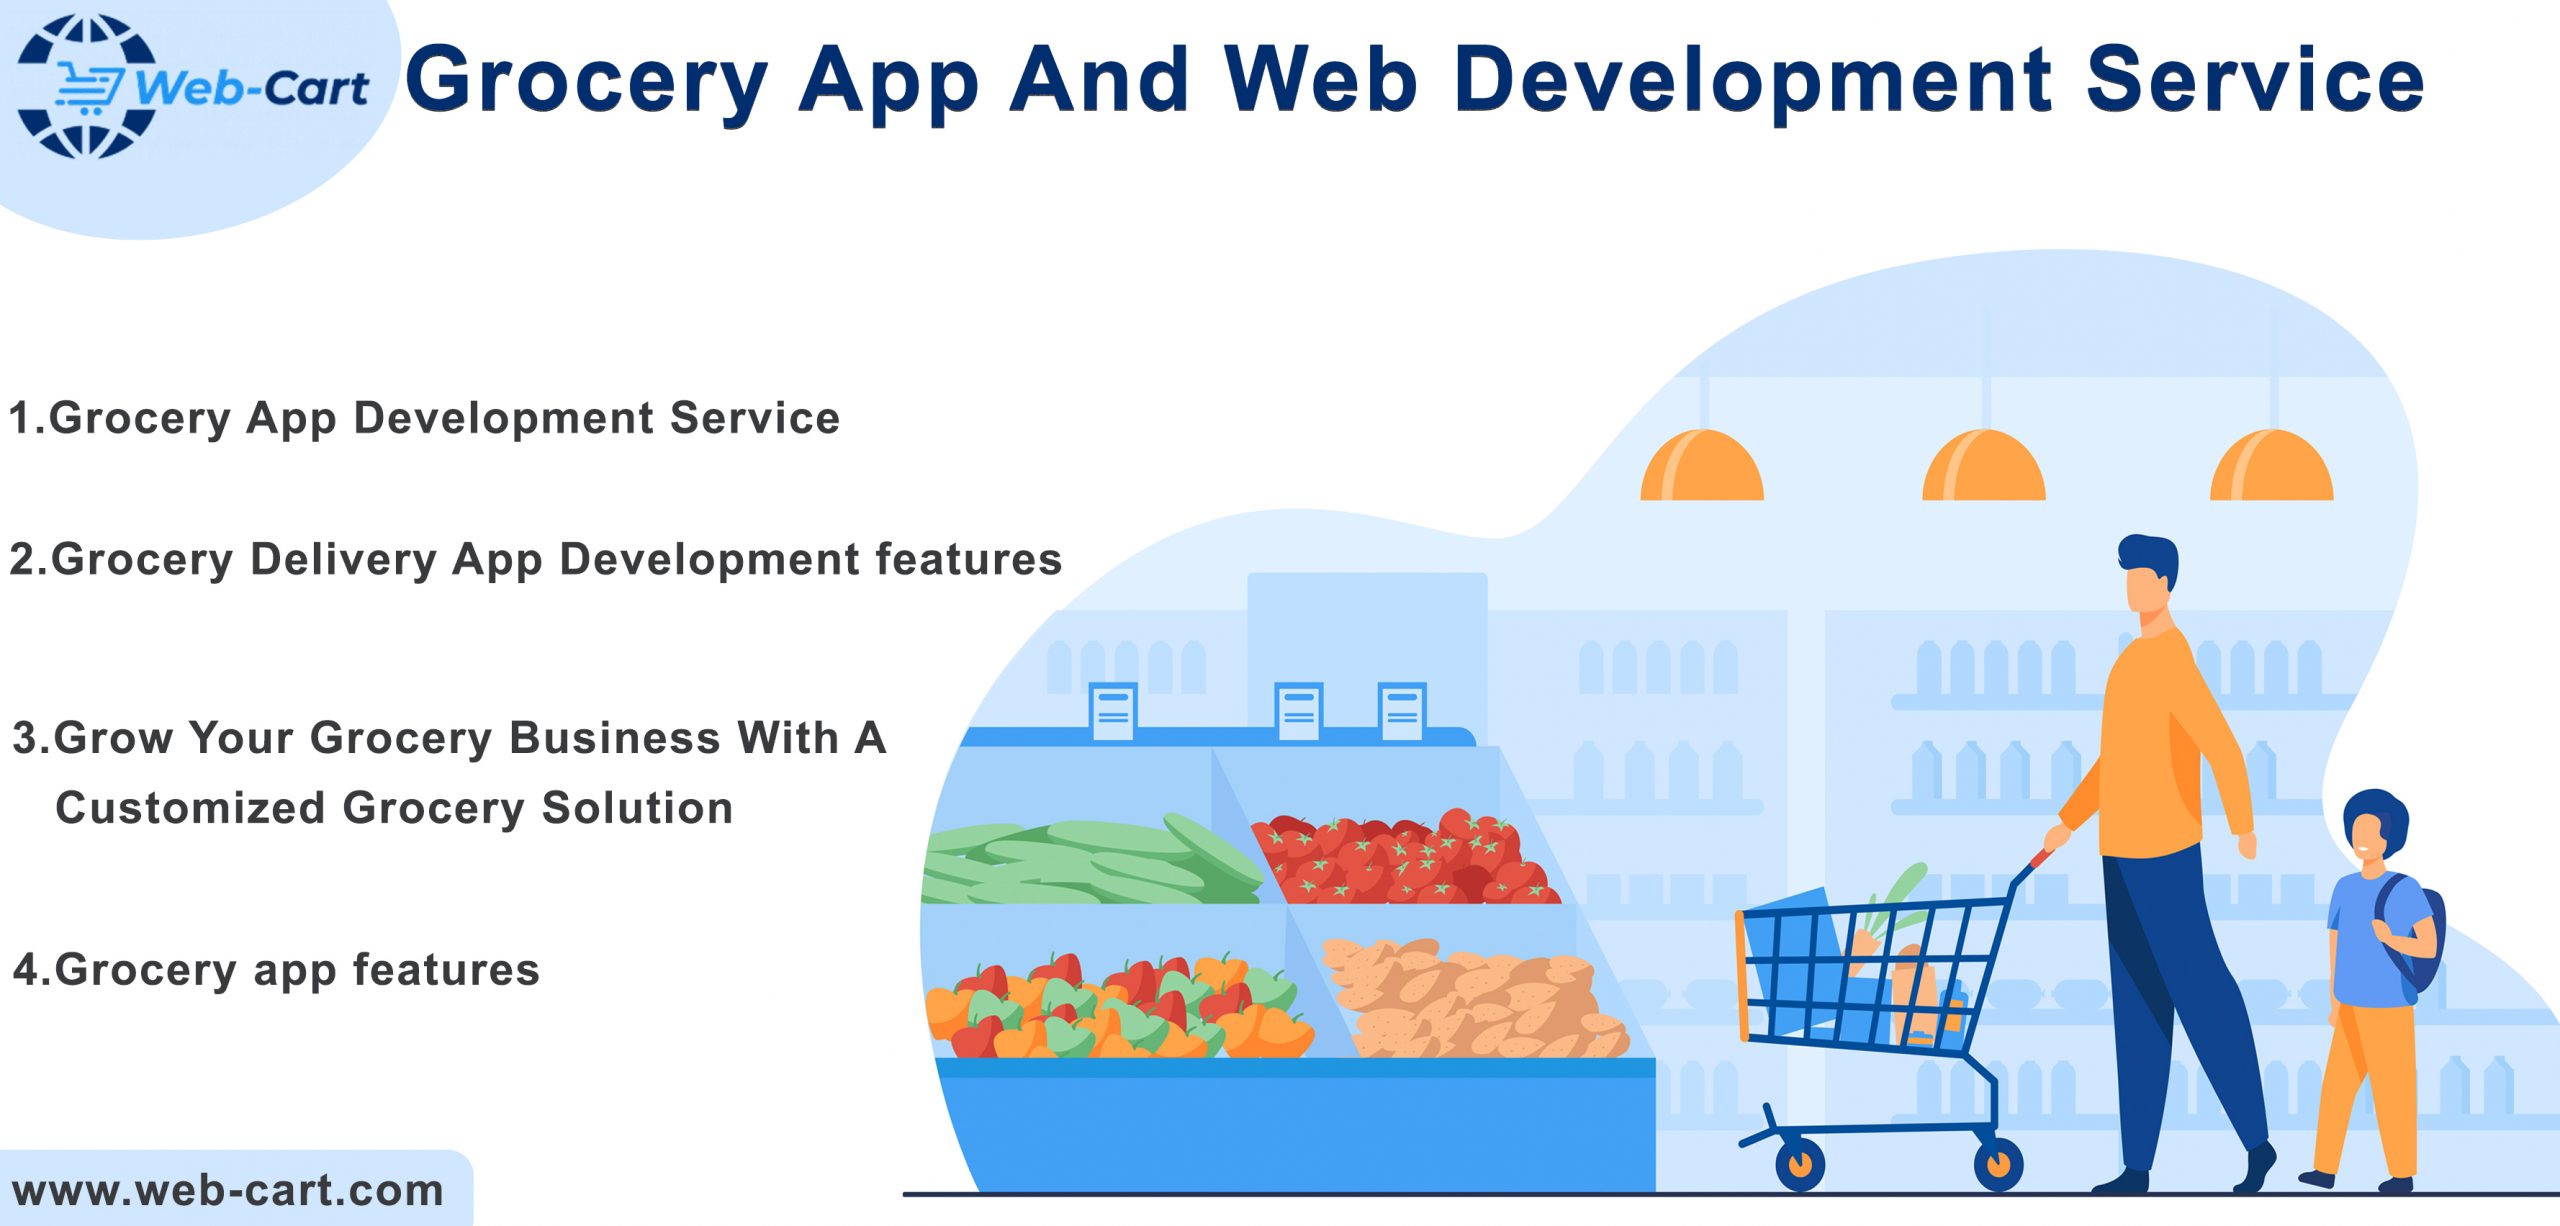 Grocery App And Web Development Service: Be Present In Every Household